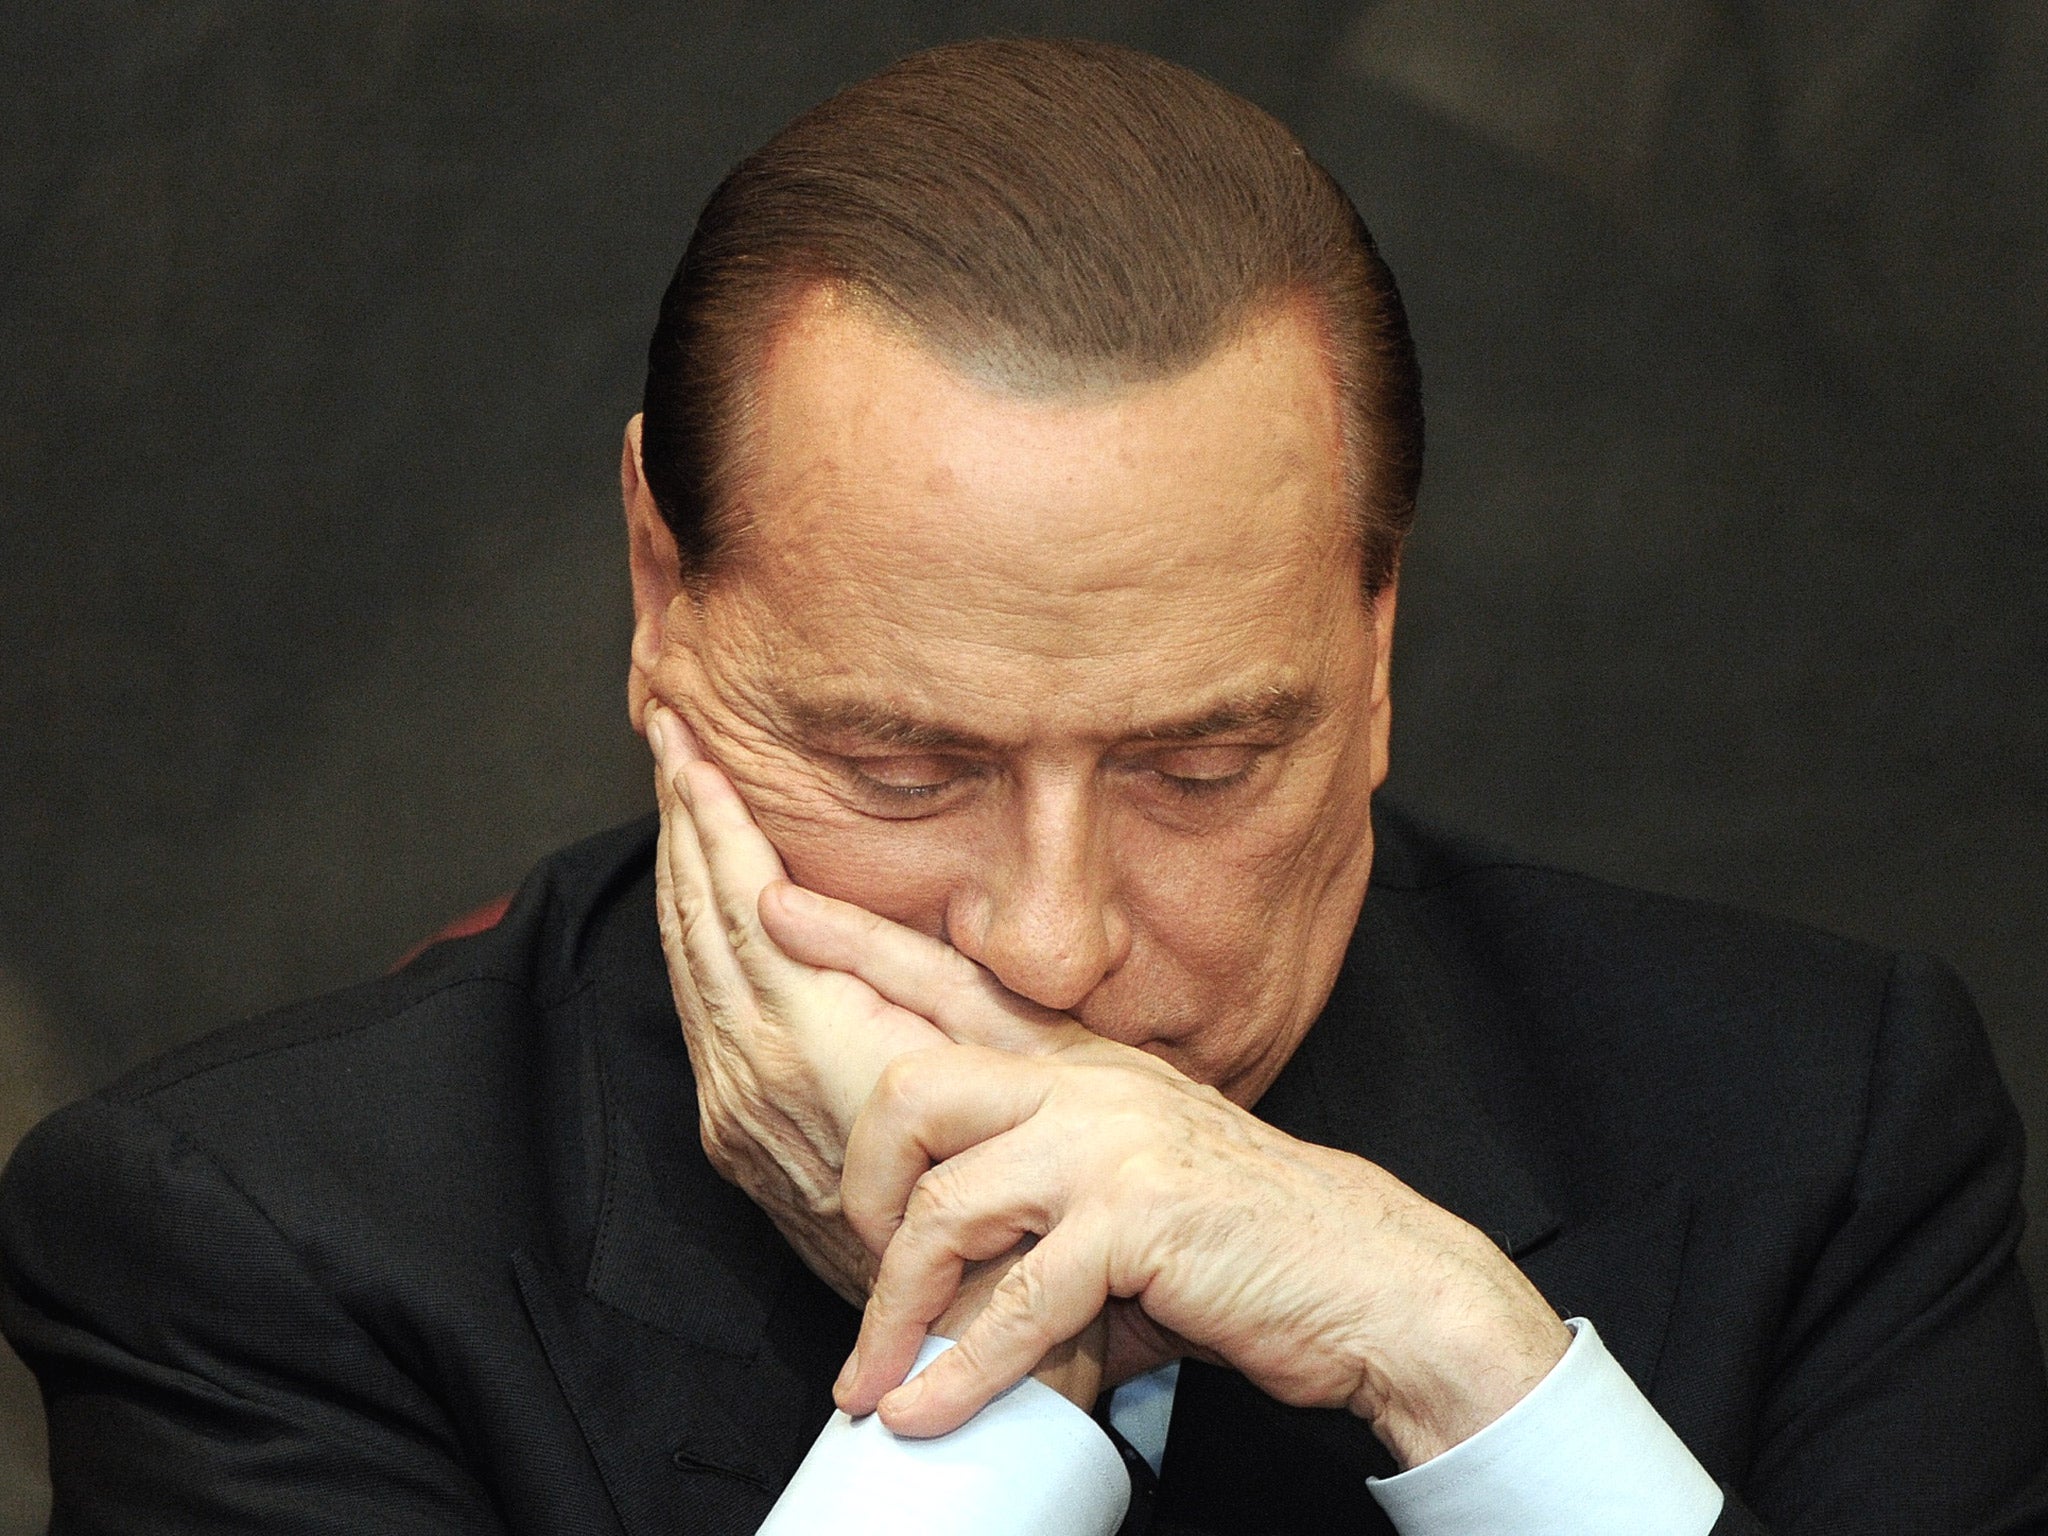 Silvio Berlusconi plans to appeal and cites ‘judicial persecution’